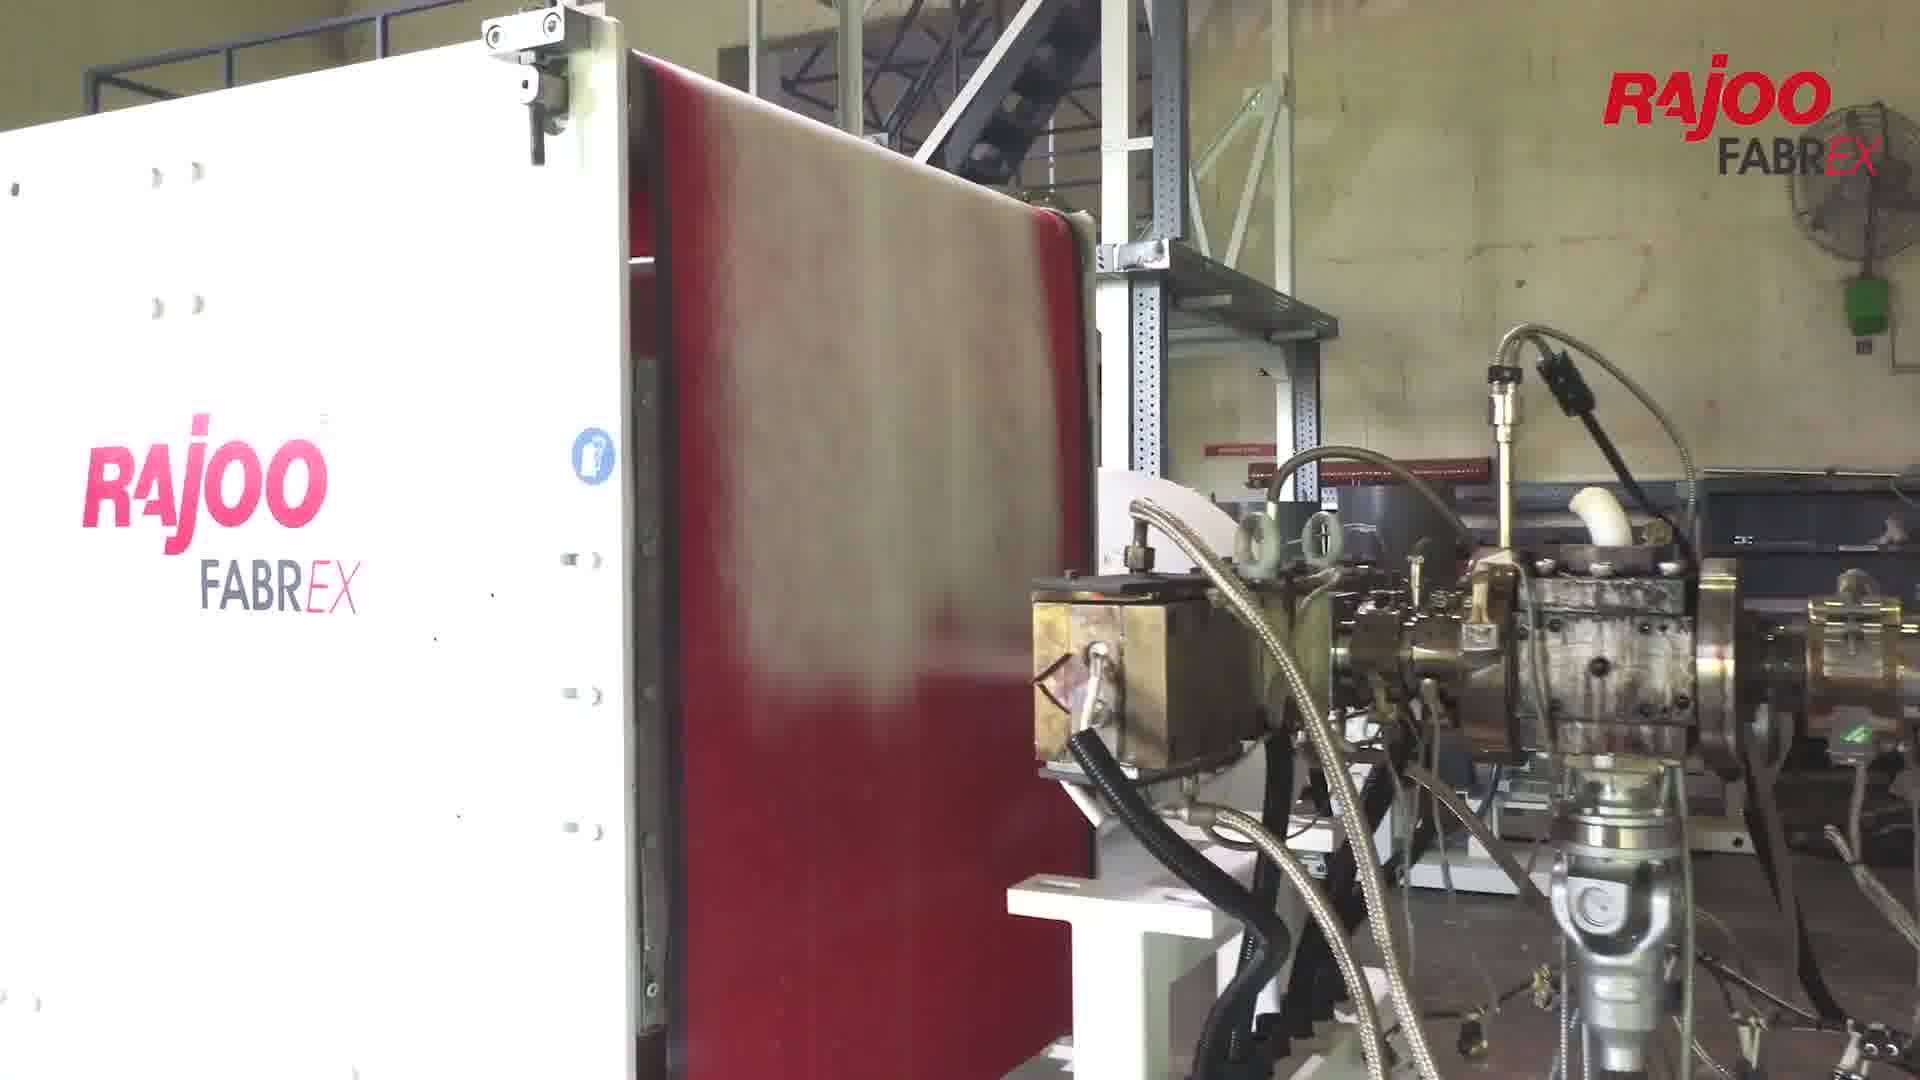 Our Grandiose Melt Blown Fabric making Machine, FABREX in action.

FabrEX® nonwoven lines are designed and manufactured targeting various applications to provide specific functions such as absorbency, liquid repellence, resilience, stretch, softness, strength, flame retardant, washable, cushioning, filtering, use as a bacterial barrier, and sterility. These properties are often combined to create fabrics suited for specific applications while achieving a good balance between product use-life and cost. They mimic the appearance, texture, and strength of a woven textile or polymer fabric and can be as bulky as the thickest padding. In combination with other materials, they provide a spectrum of products with diverse properties and are used alone or as components of apparel, home furnishings, health care, engineering, industrial, and consumer goods.

#RajooEngineers #Rajkot #PlasticMachinery #Machines #PlasticIndustry